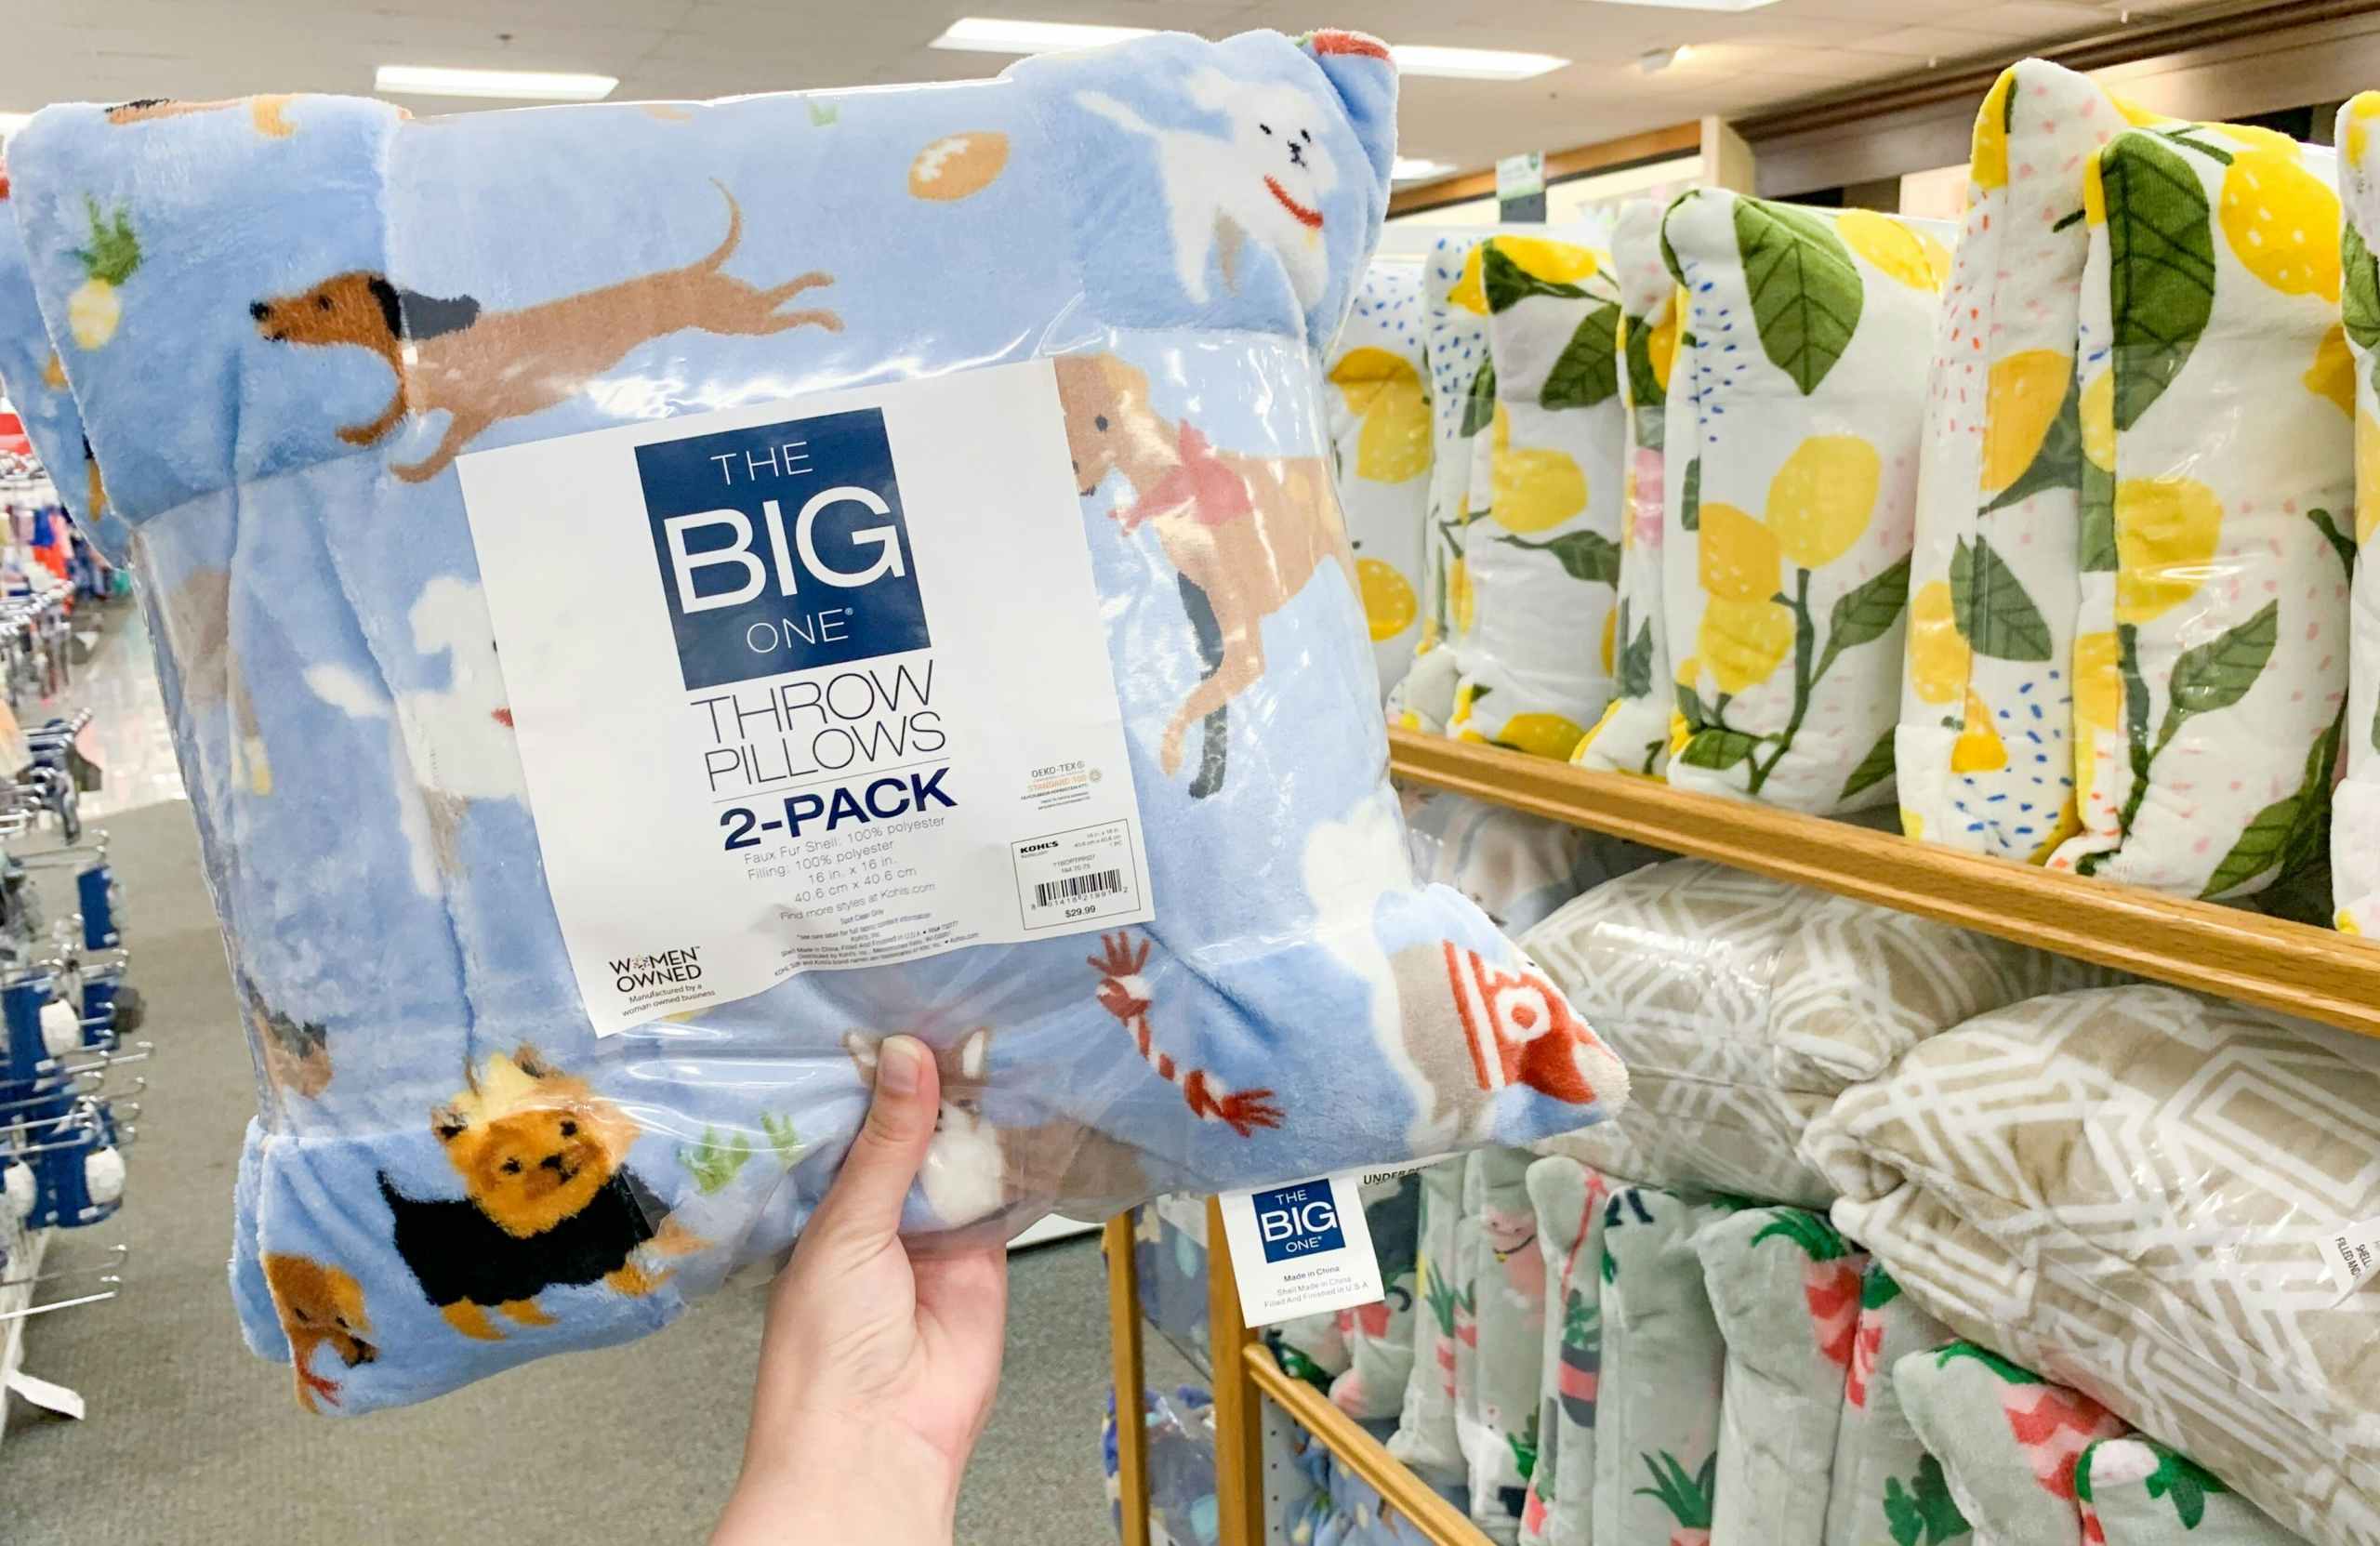 the big one 2-pack pillows kohls